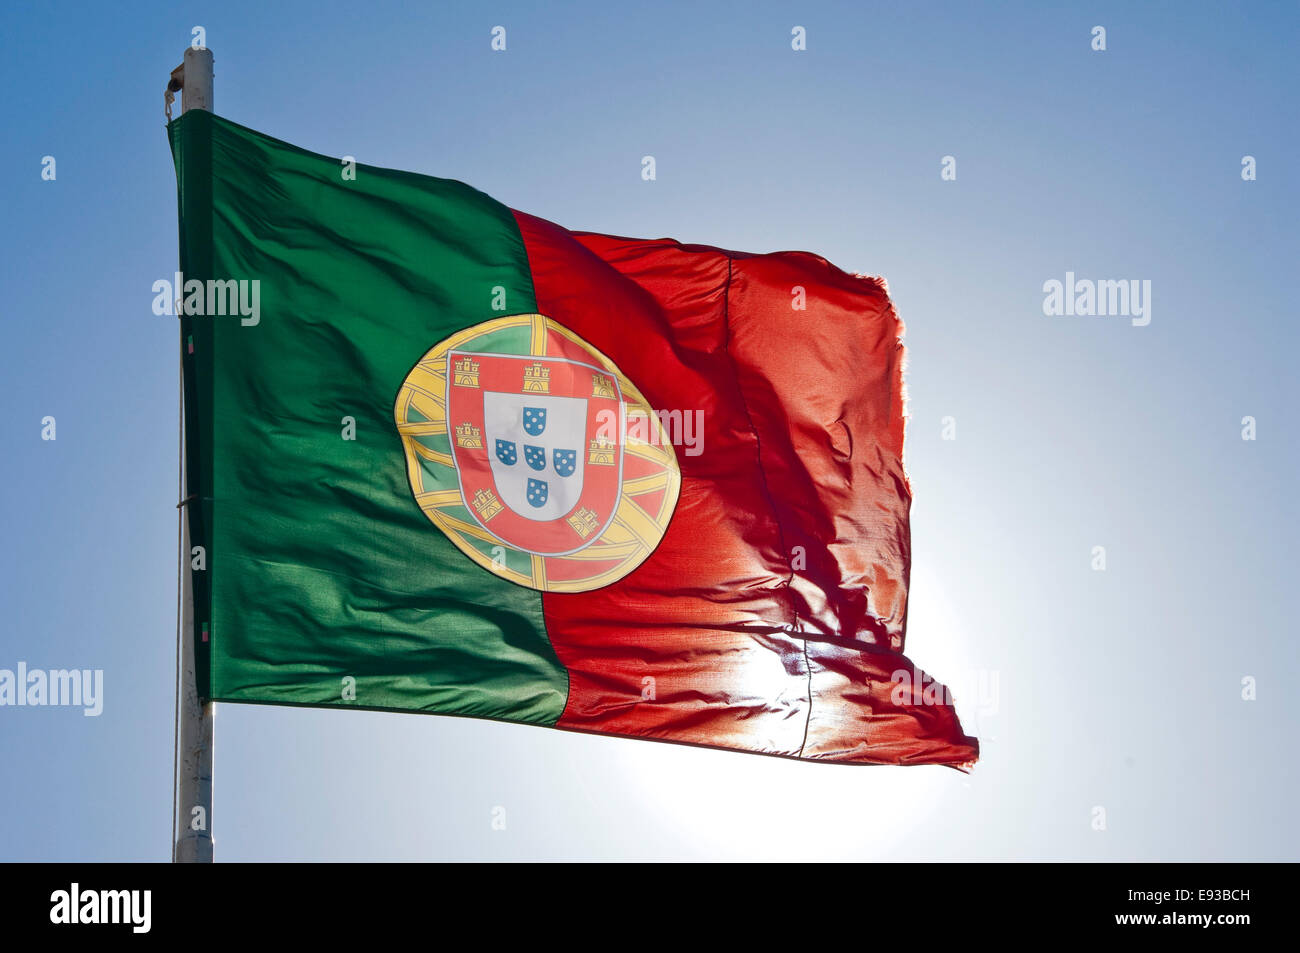 Horizontal close up view of the Portugese national flag in Lisbon. Stock Photo